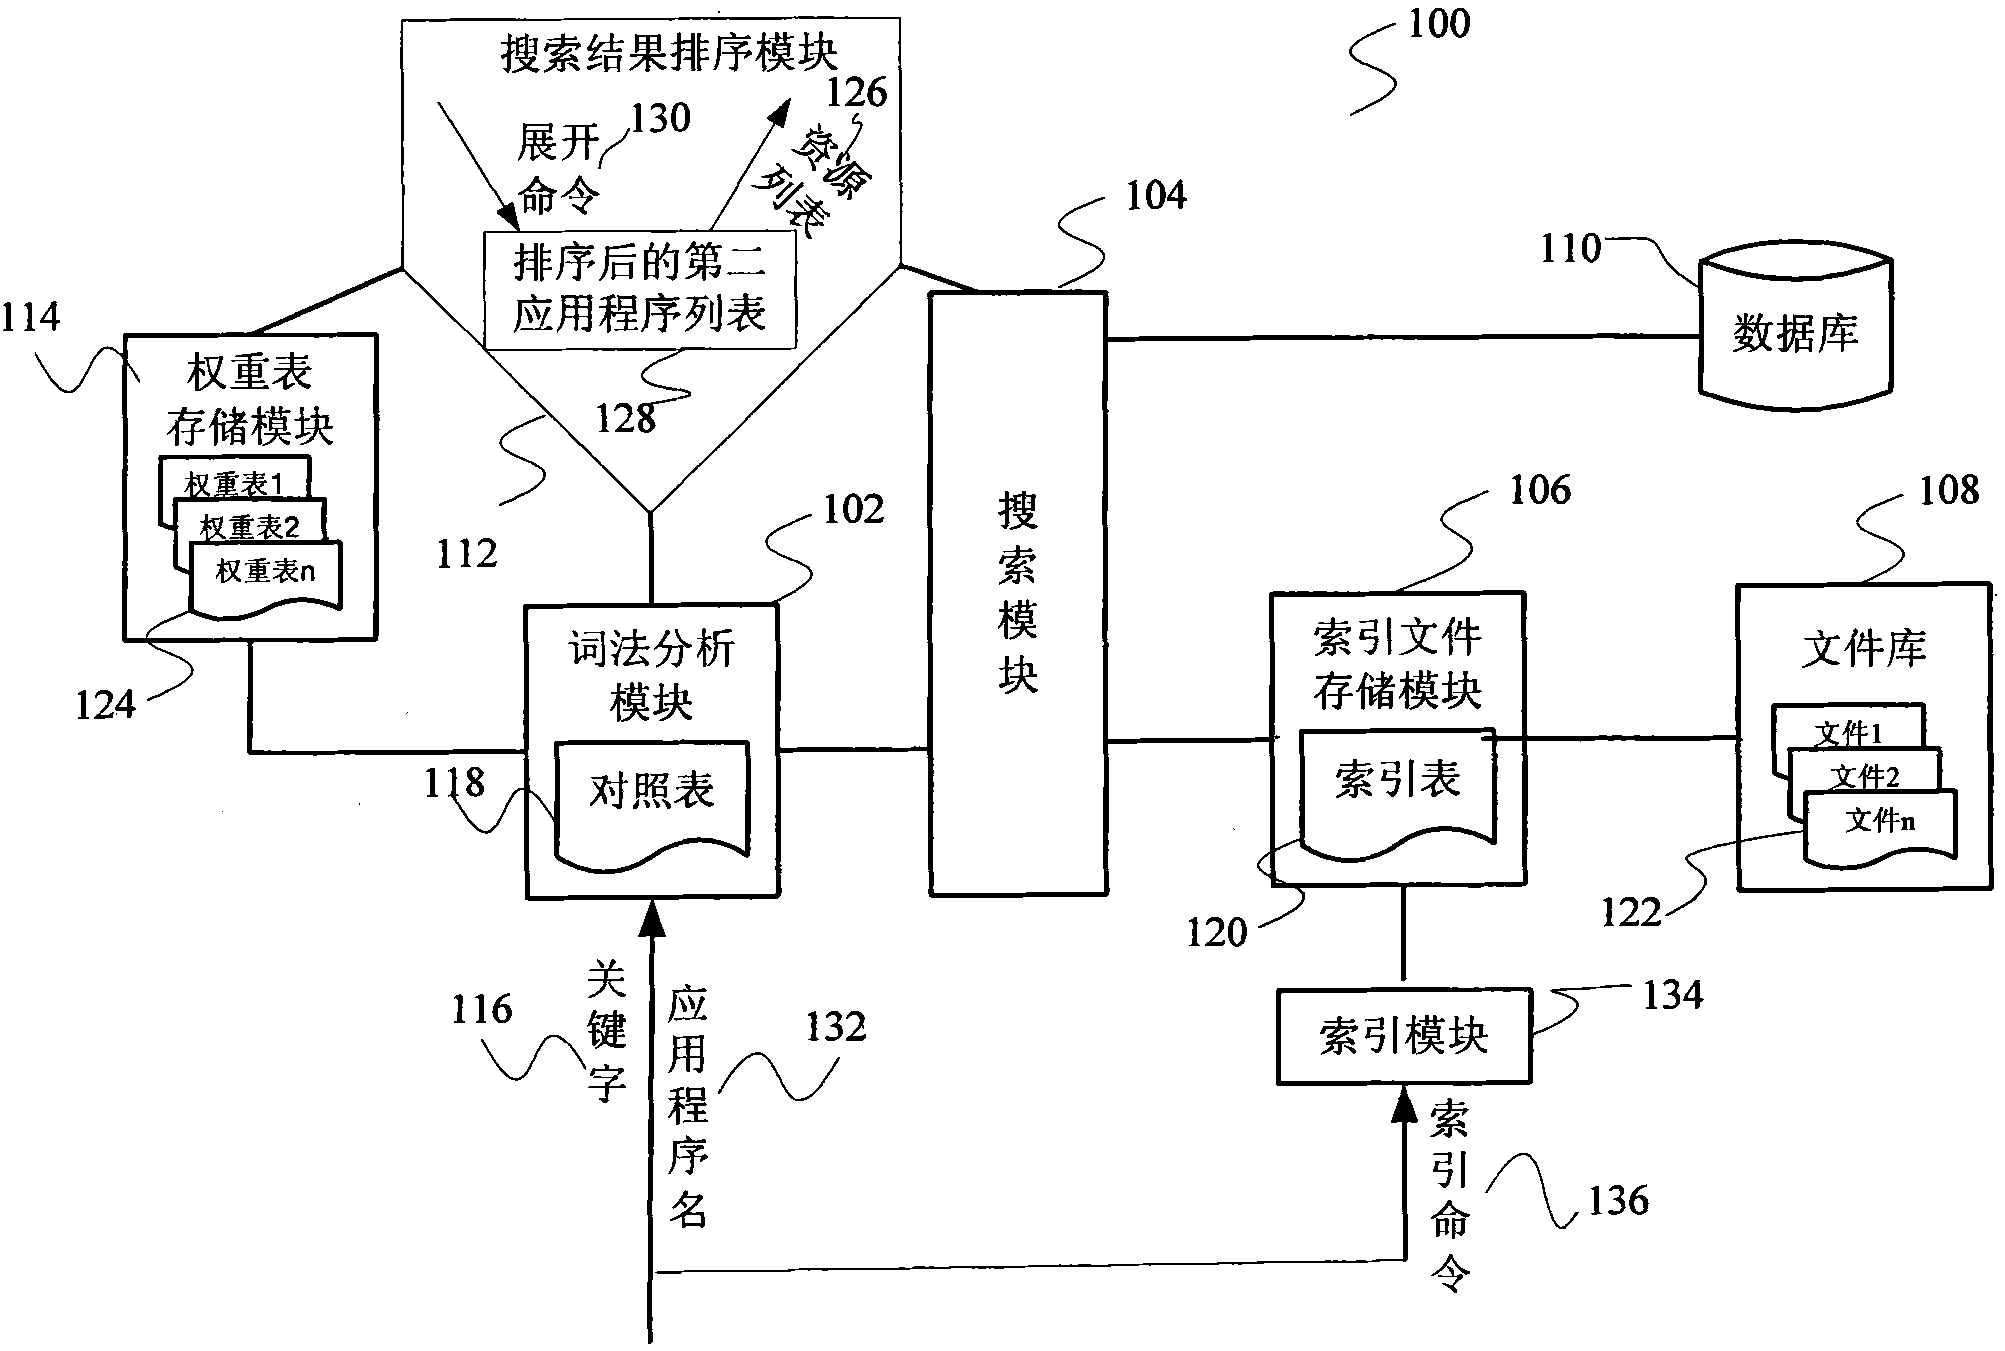 Search engine used in personal hand-held equipment and resource search method